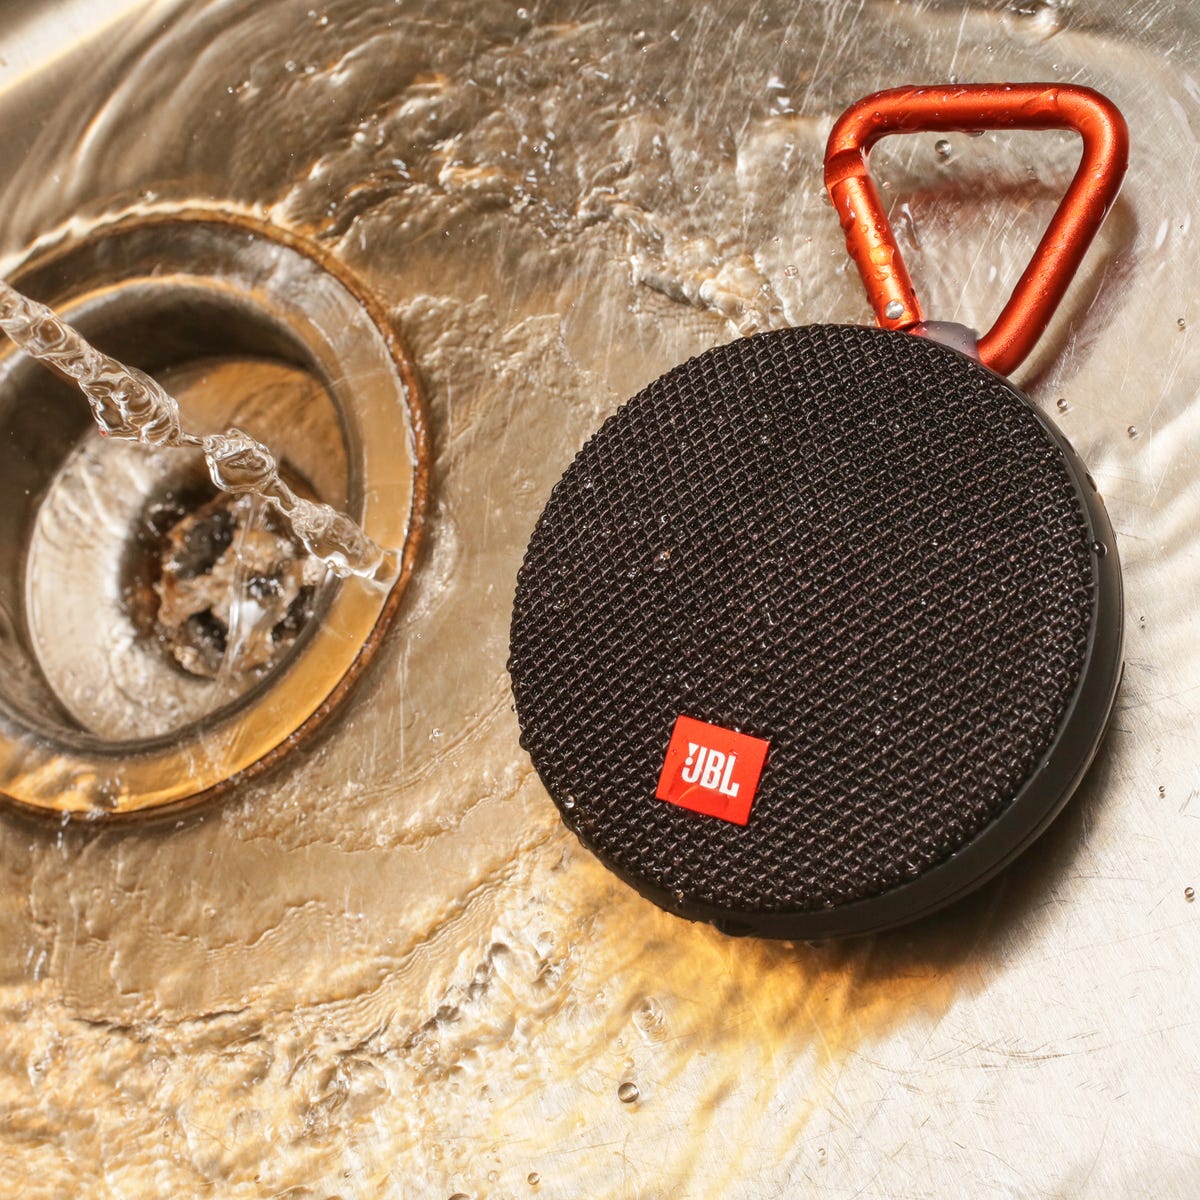 JBL Clip 2 review: Tiny Bluetooth speaker improves with full waterproofing, battery life - CNET